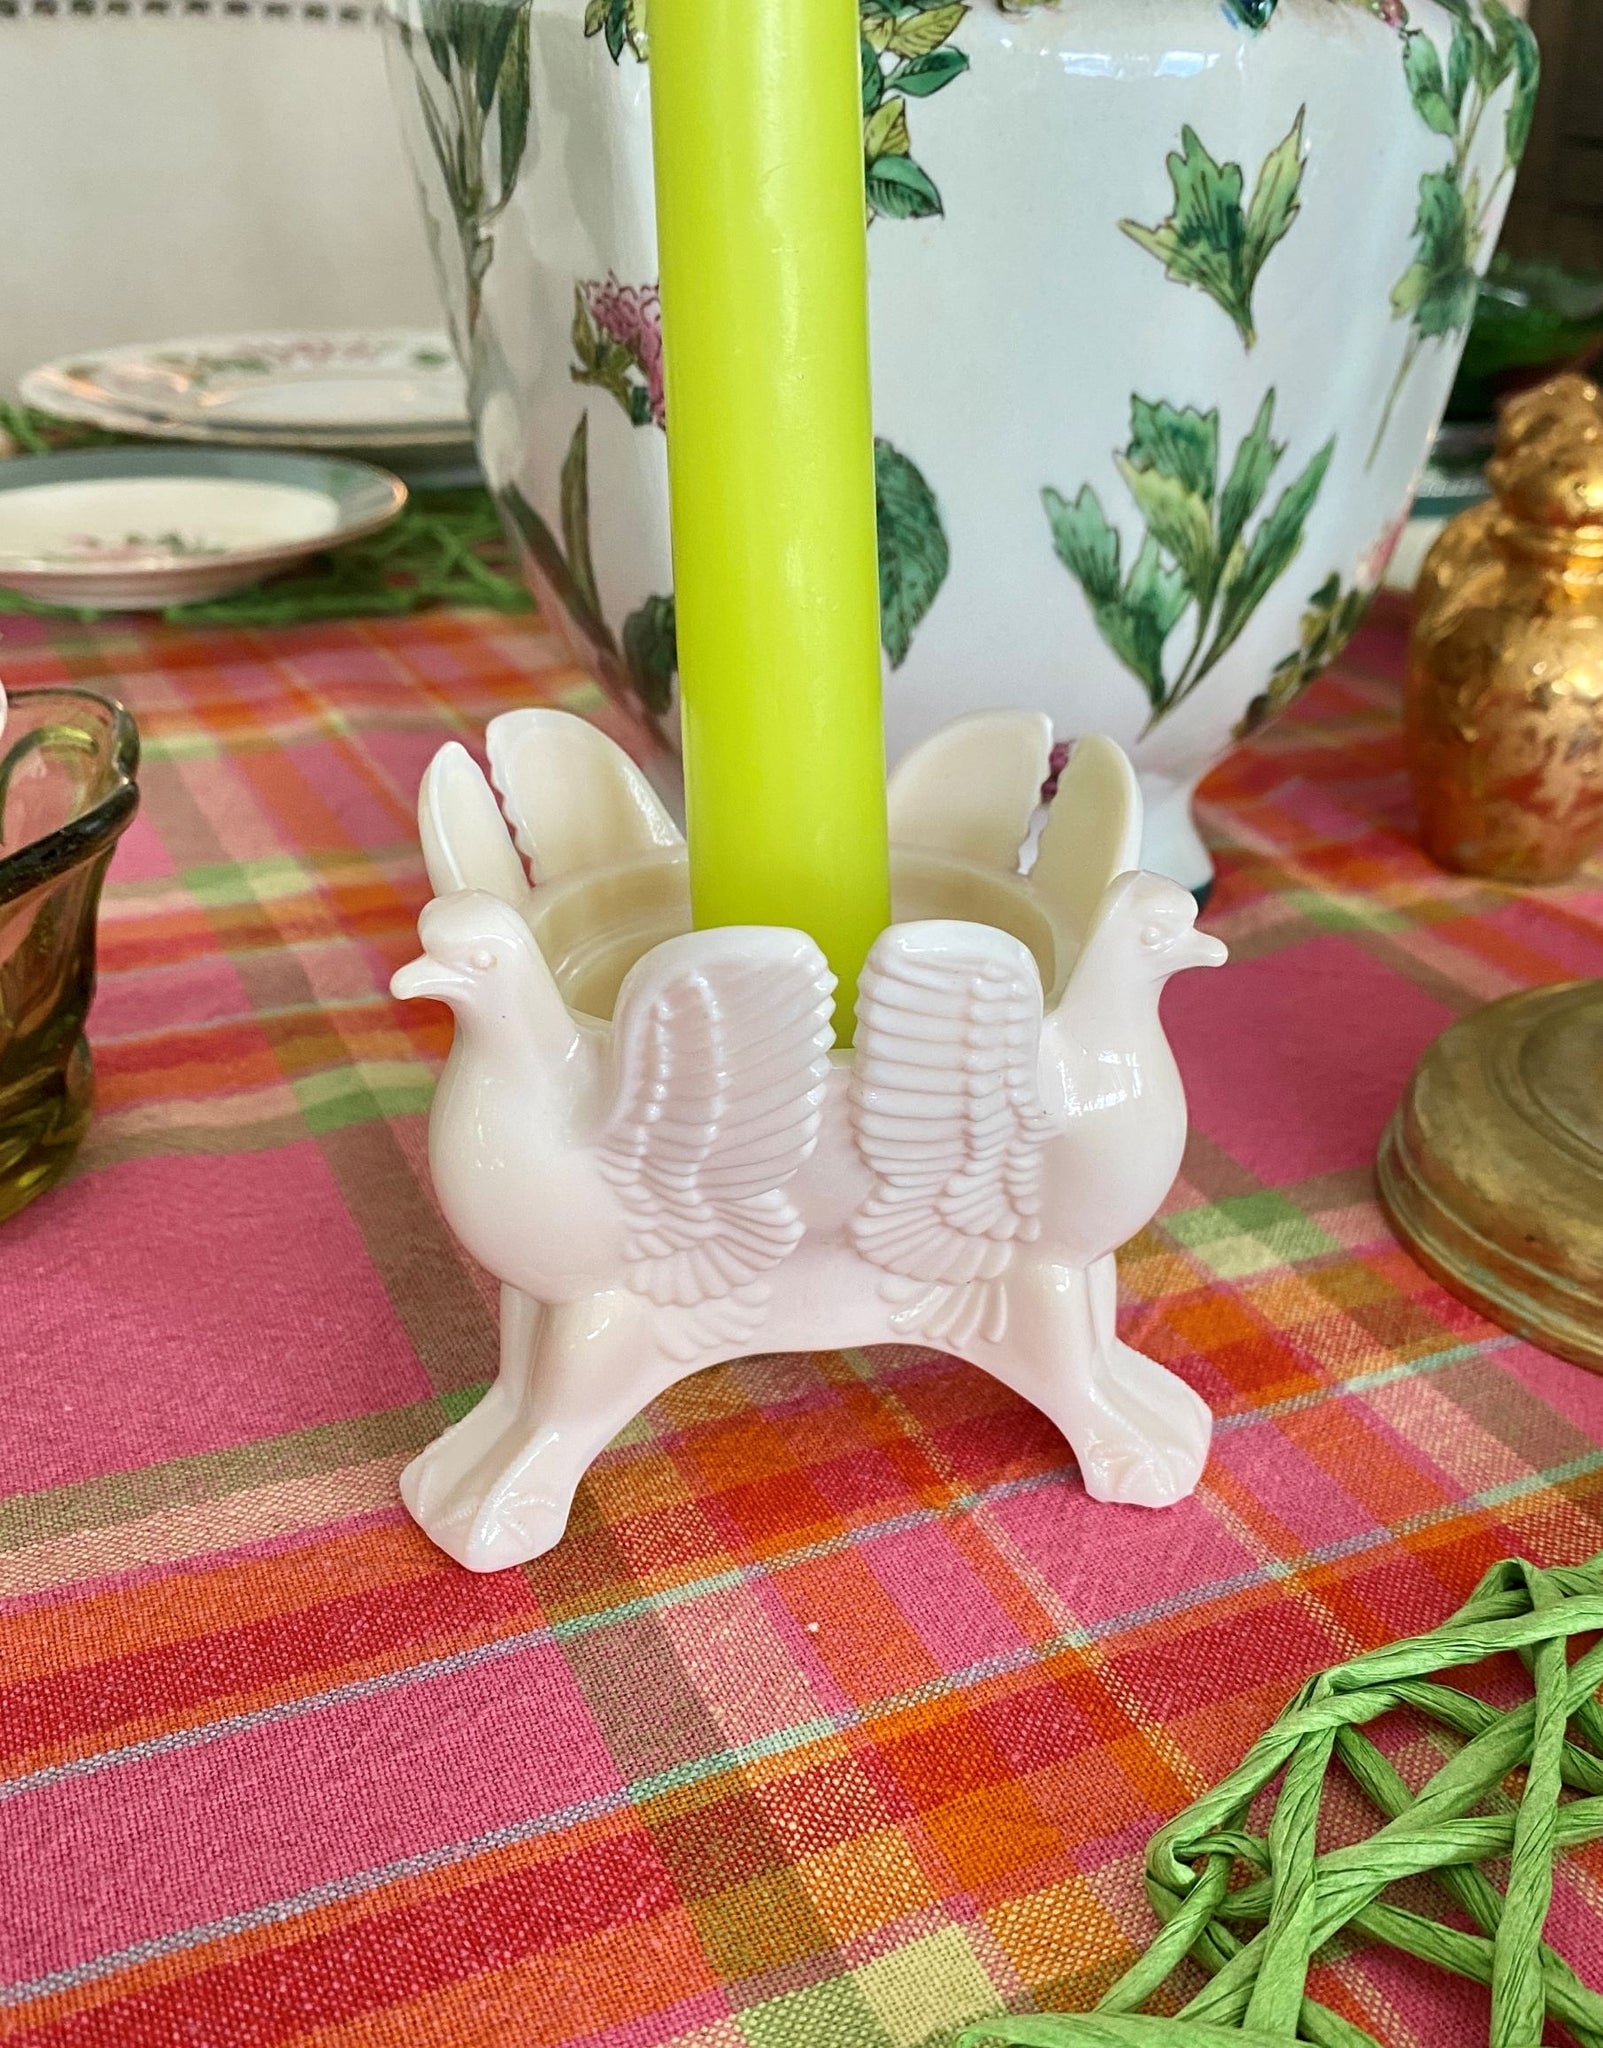 Jeanette Milkglass Eagle Candle Holder - shell, pink colored